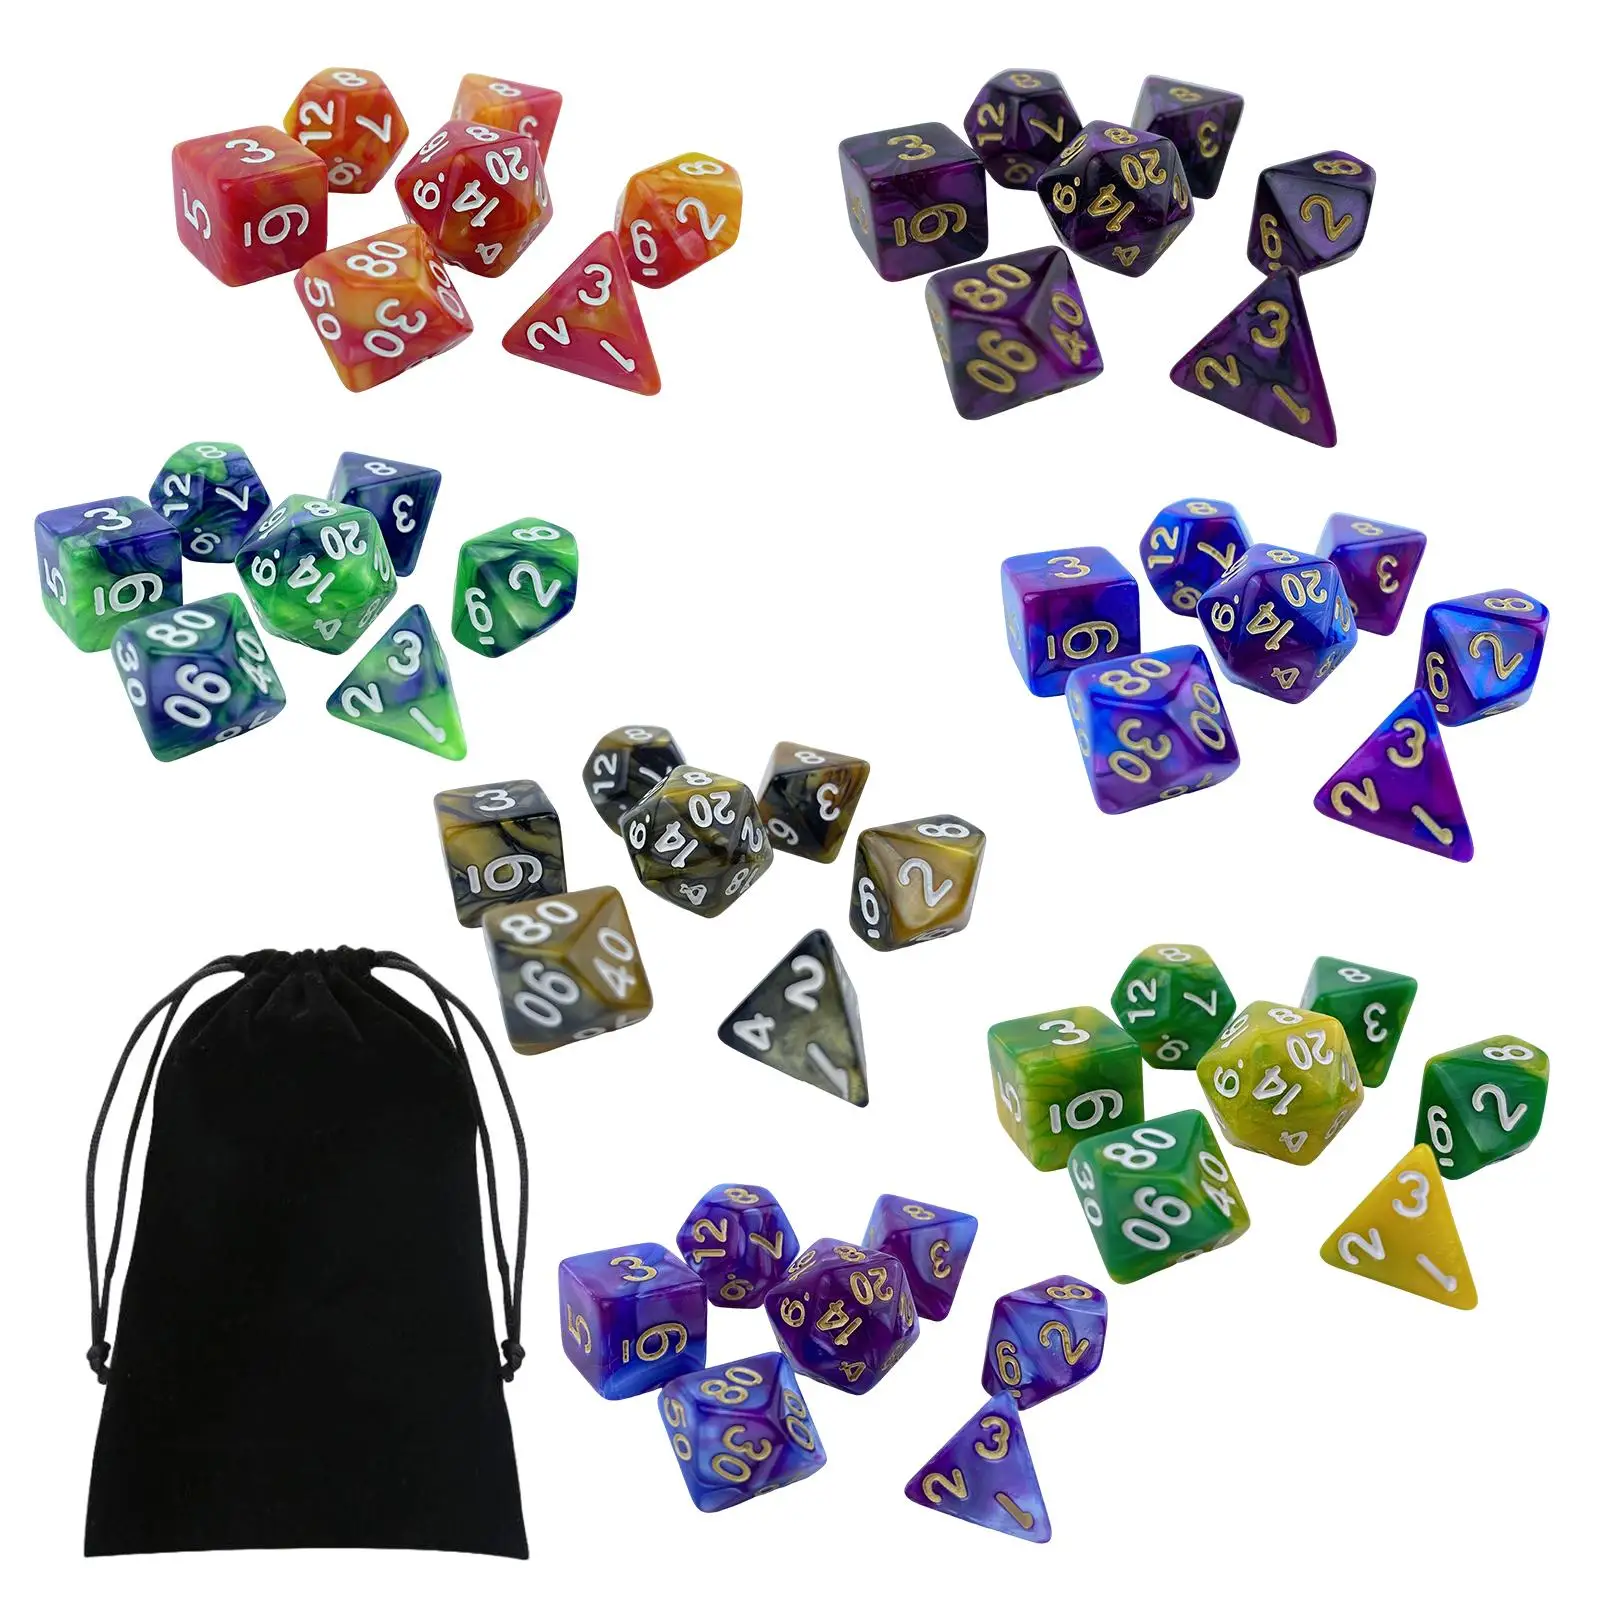 49x Polyhedral Dices Set Toys Bicolor Multipurpose for Board Game Props